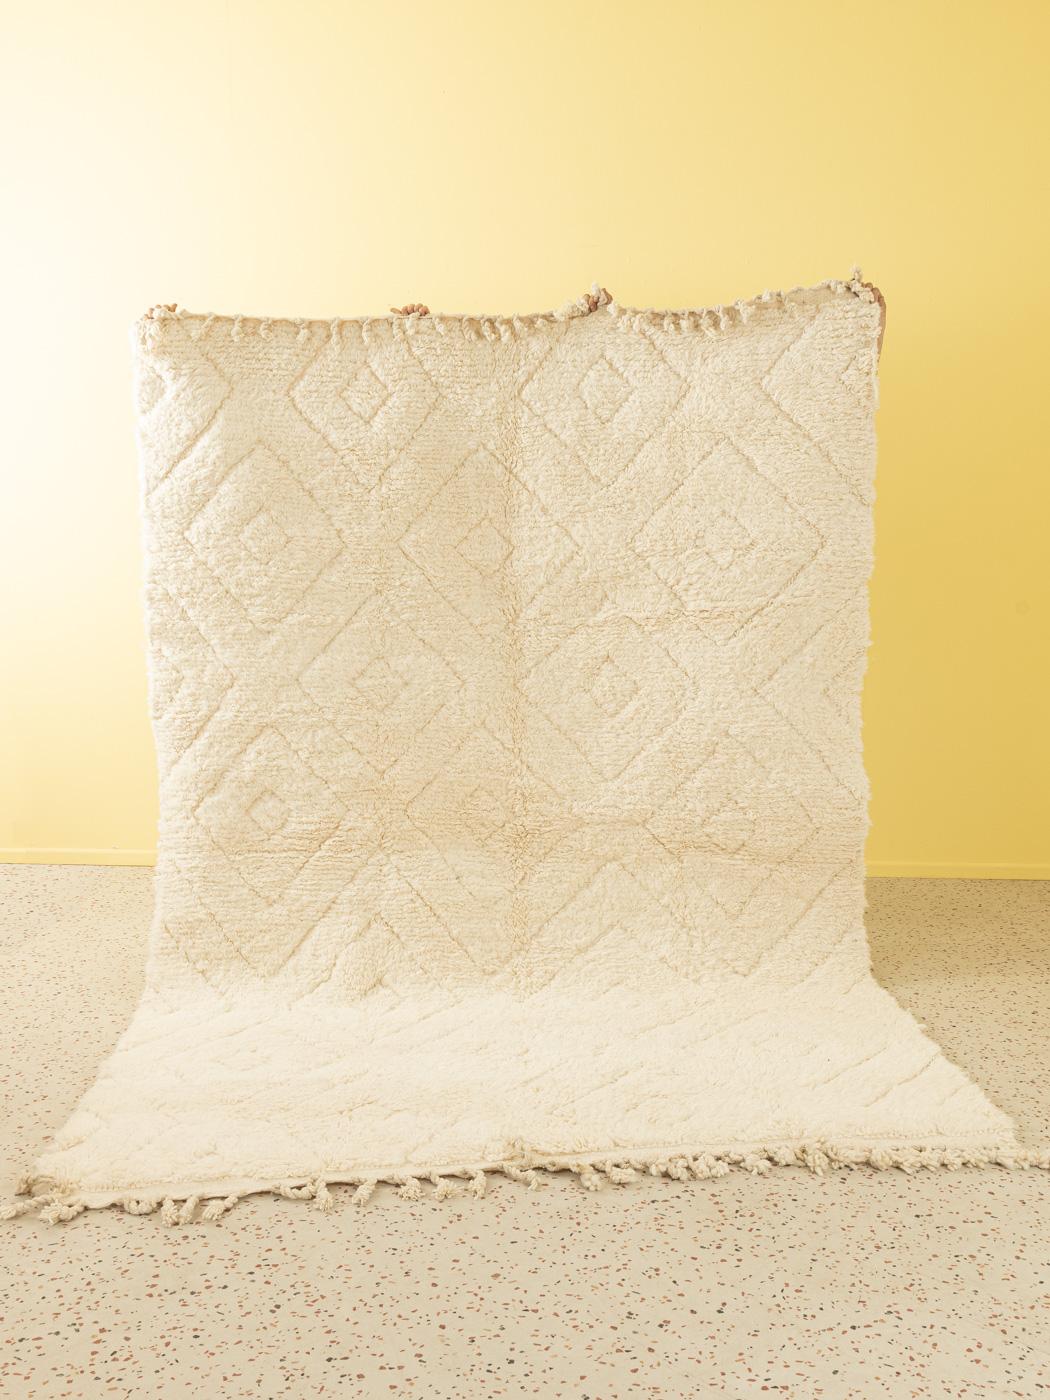 White Diamond is a contemporary 100% wool rug – thick and soft, comfortable underfoot. Our Berber rugs are handwoven and handknotted by Amazigh women in the Atlas Mountains. These communities have been crafting rugs for thousands of years. One knot